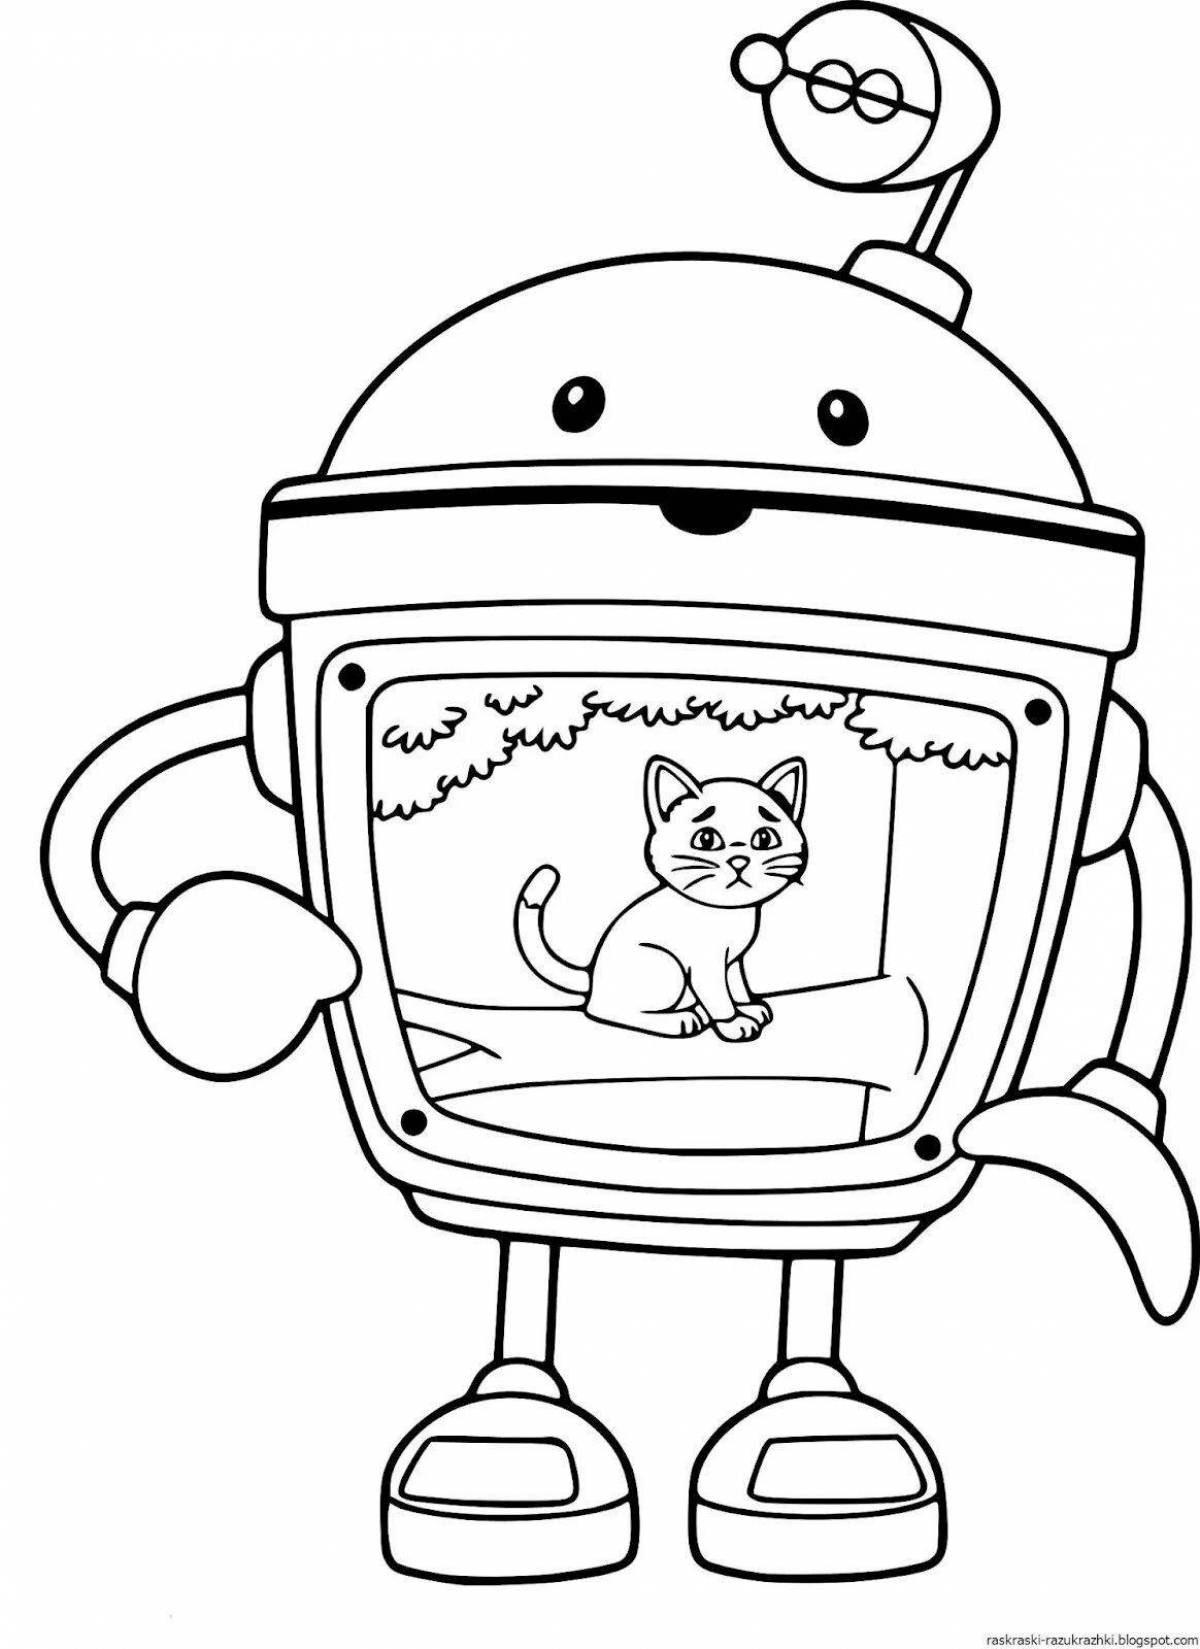 Complex android coloring page